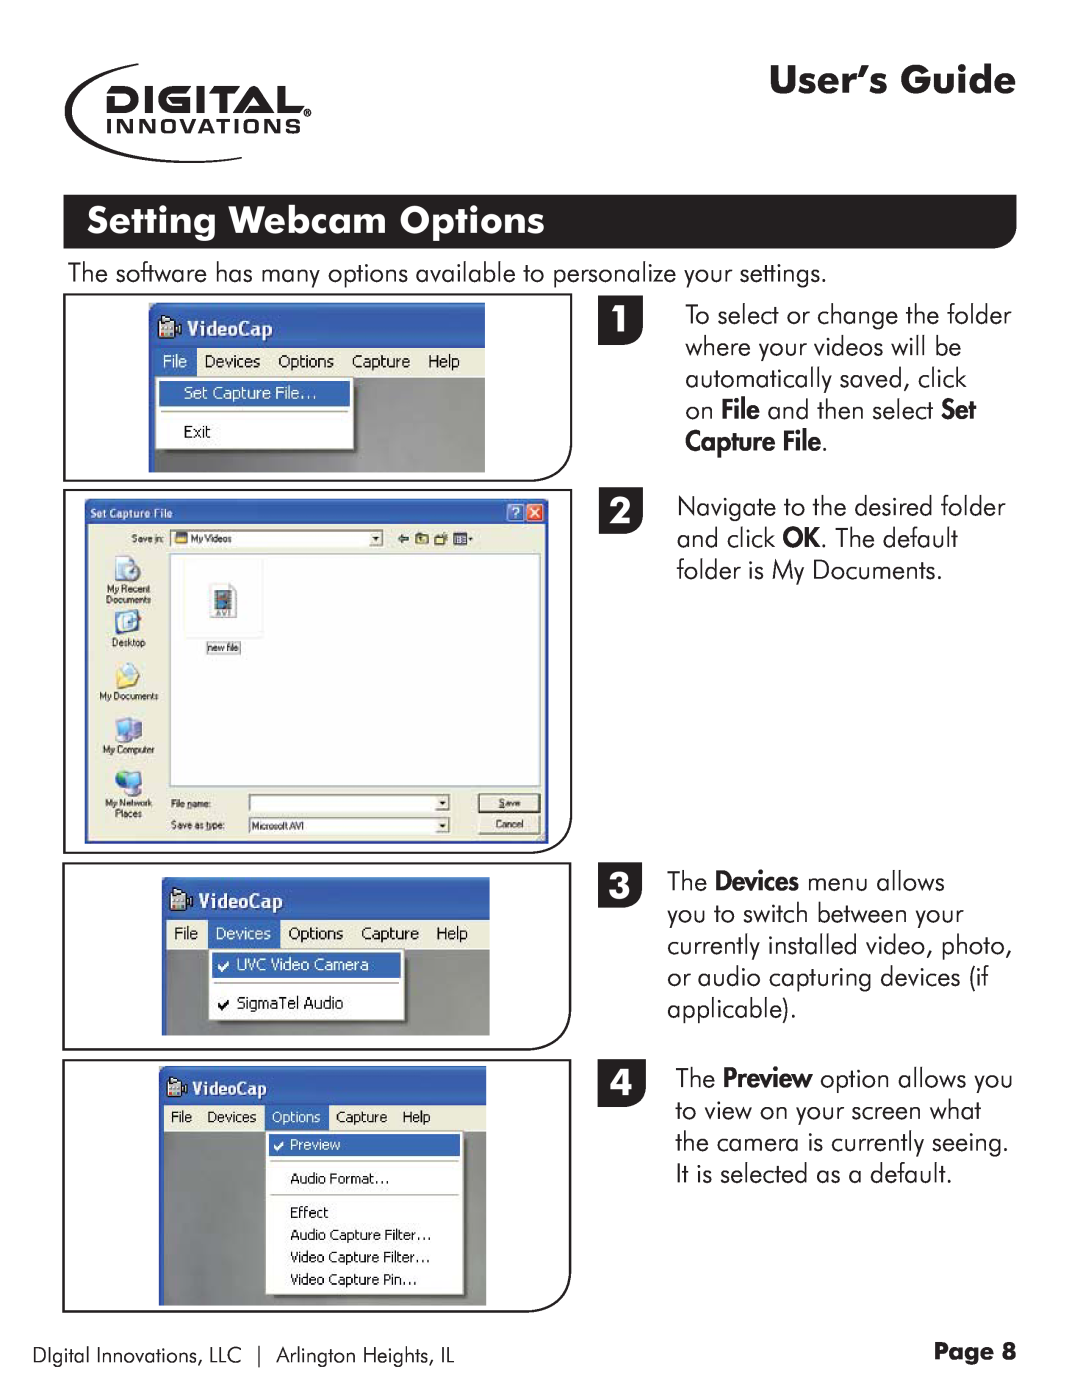 Micro Innovations 4310100 quick start Setting Webcam Options, User’s Guide 